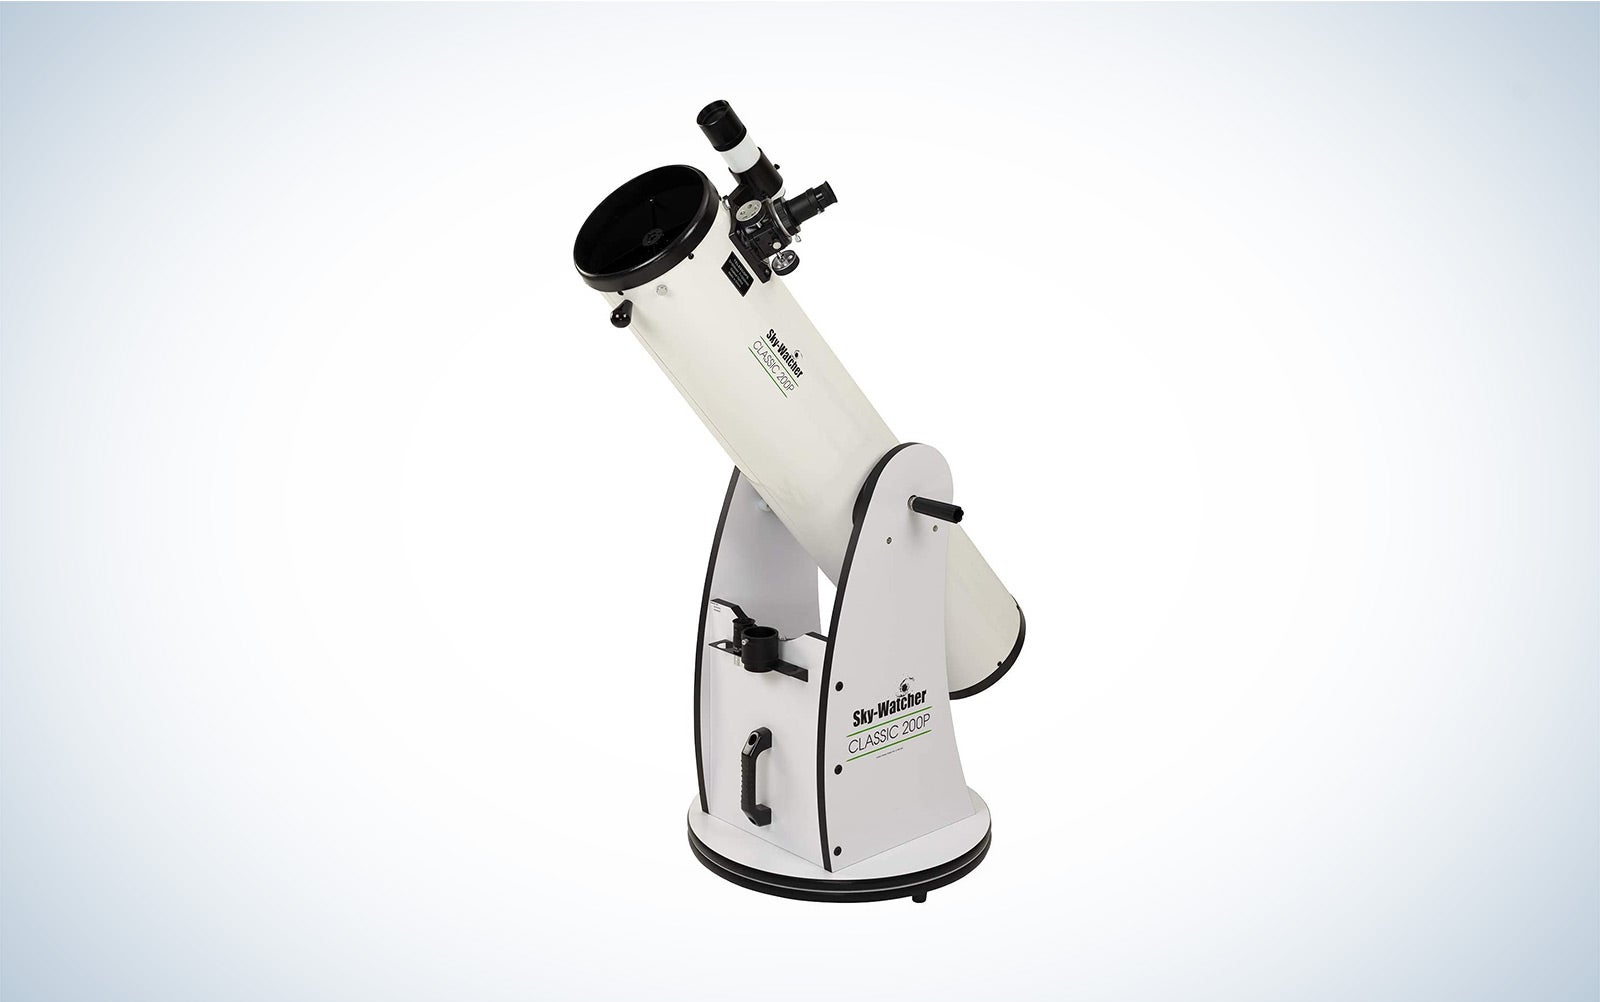 The Sky-Watcher Traditional Dobsonian 8" Telescope is best for looking at planets.